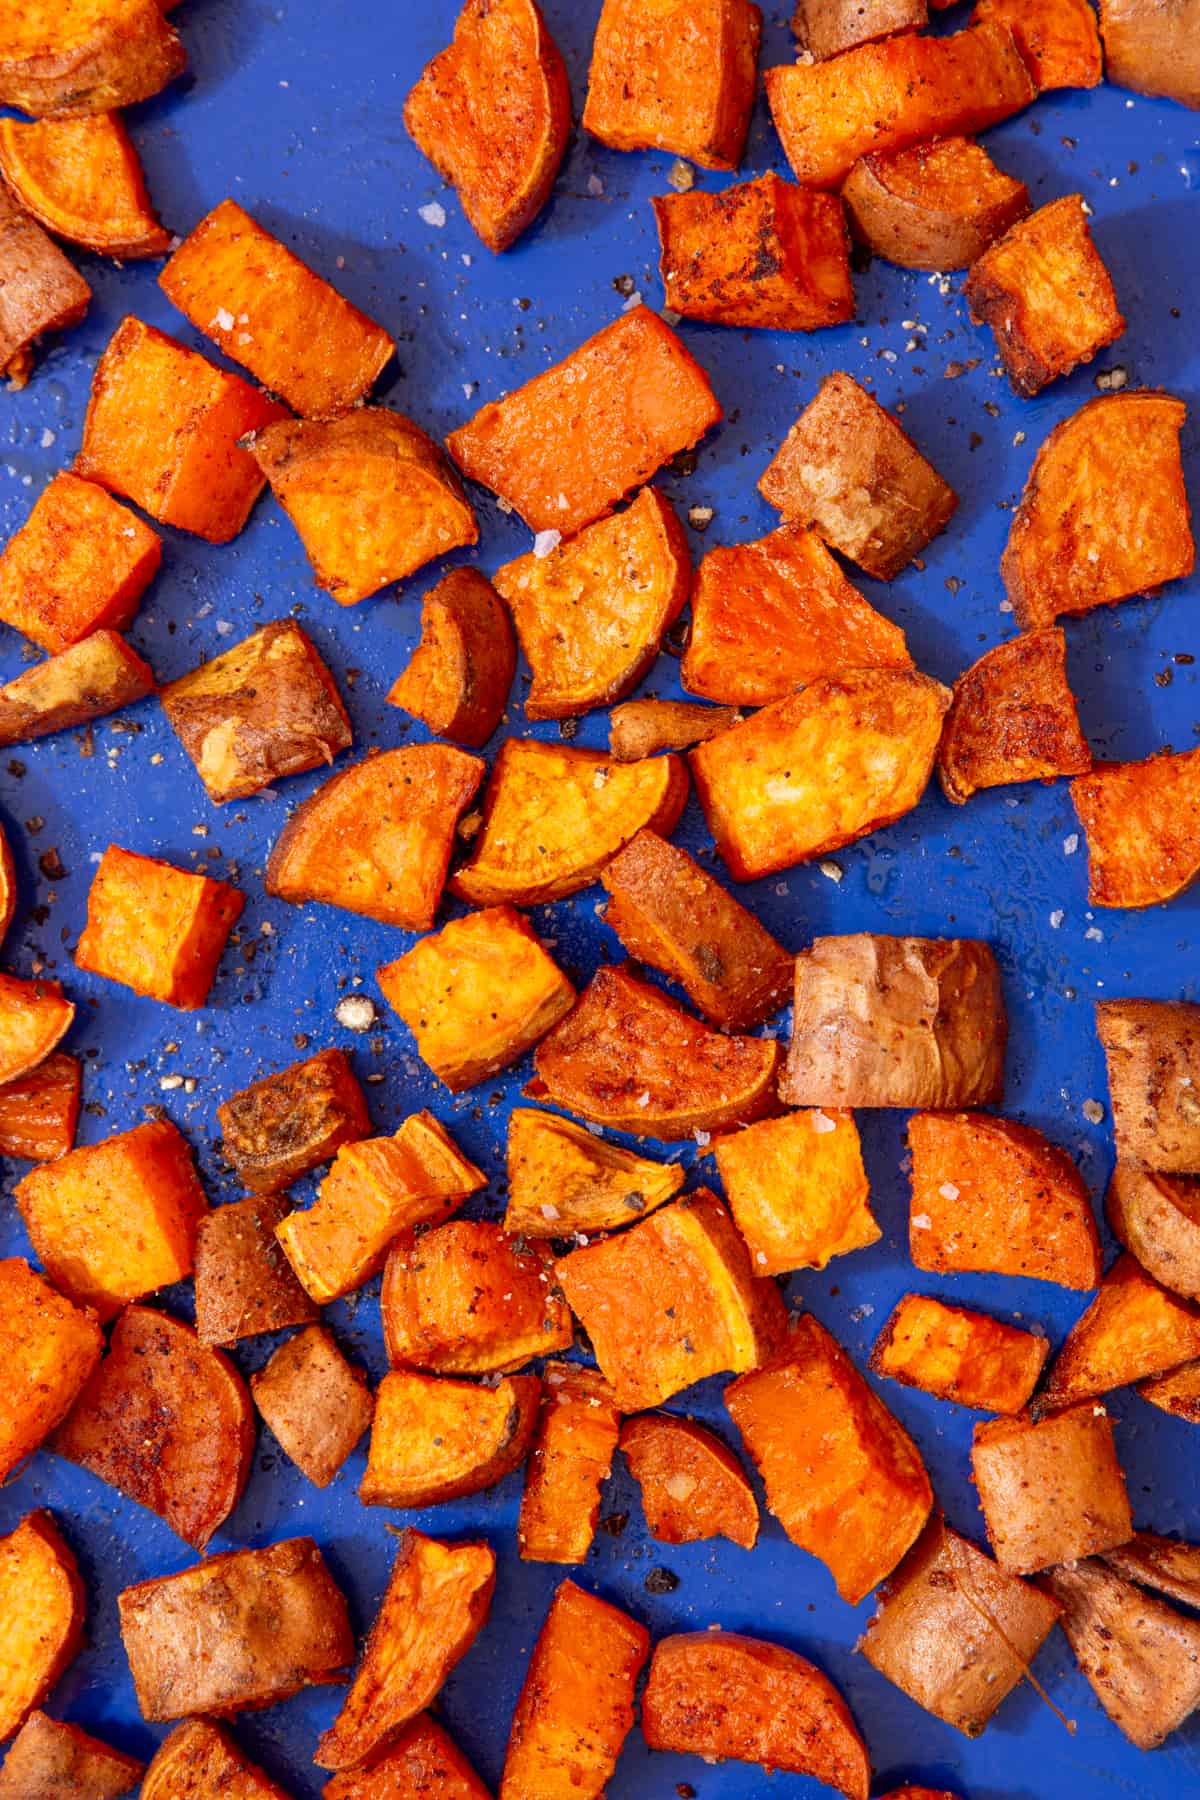 roasted sweet potato cubes with some coarse salt displayed on a blue tray.